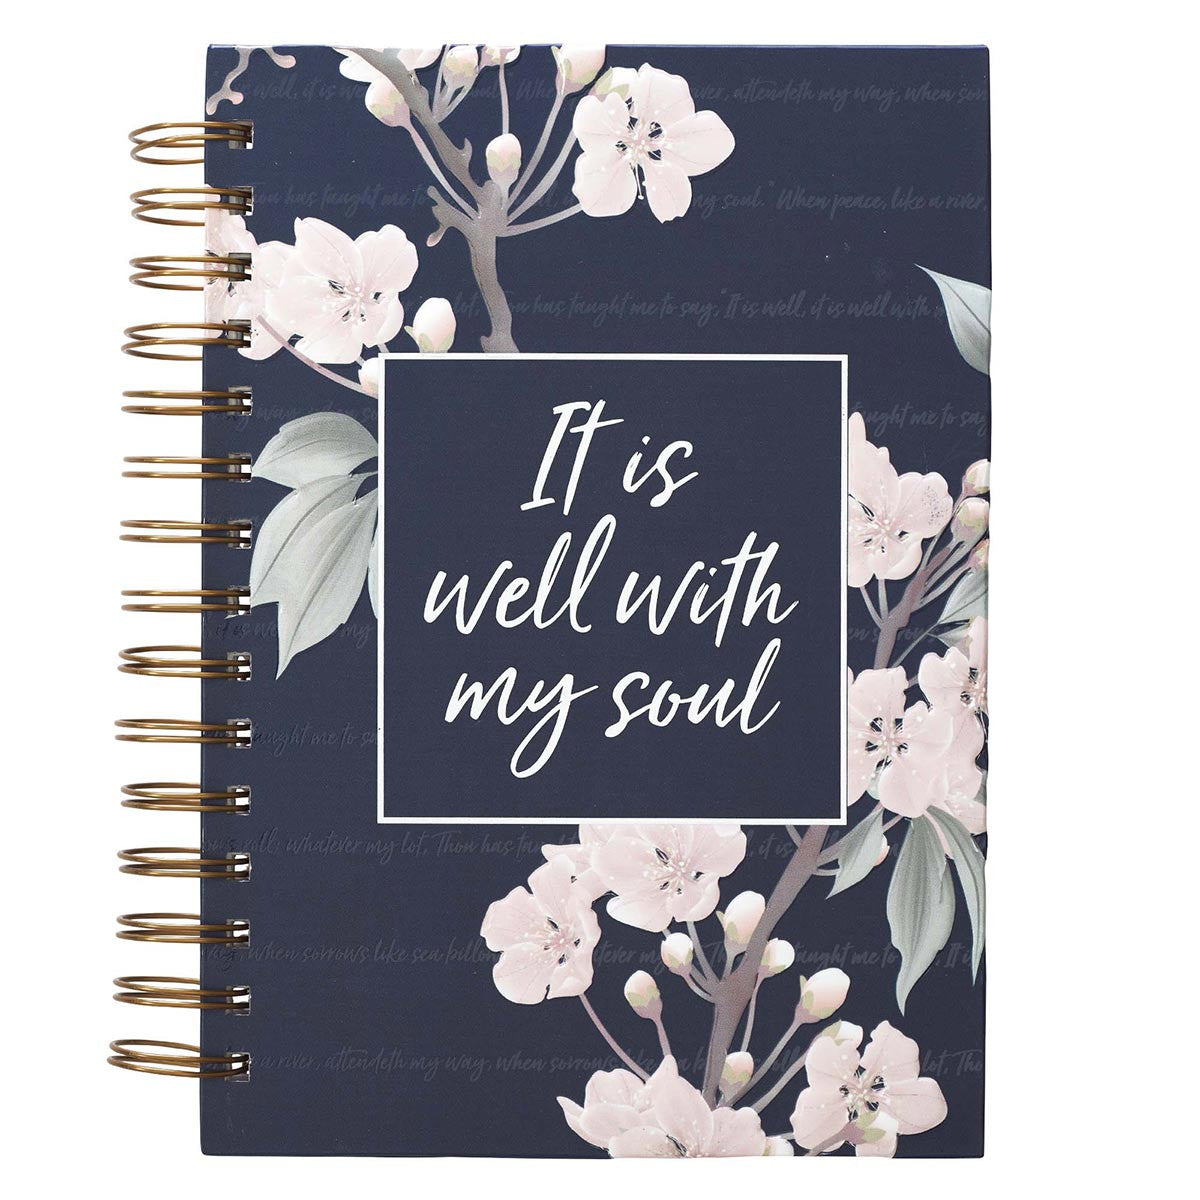 Faith Based, Wire Bound Journals for Her